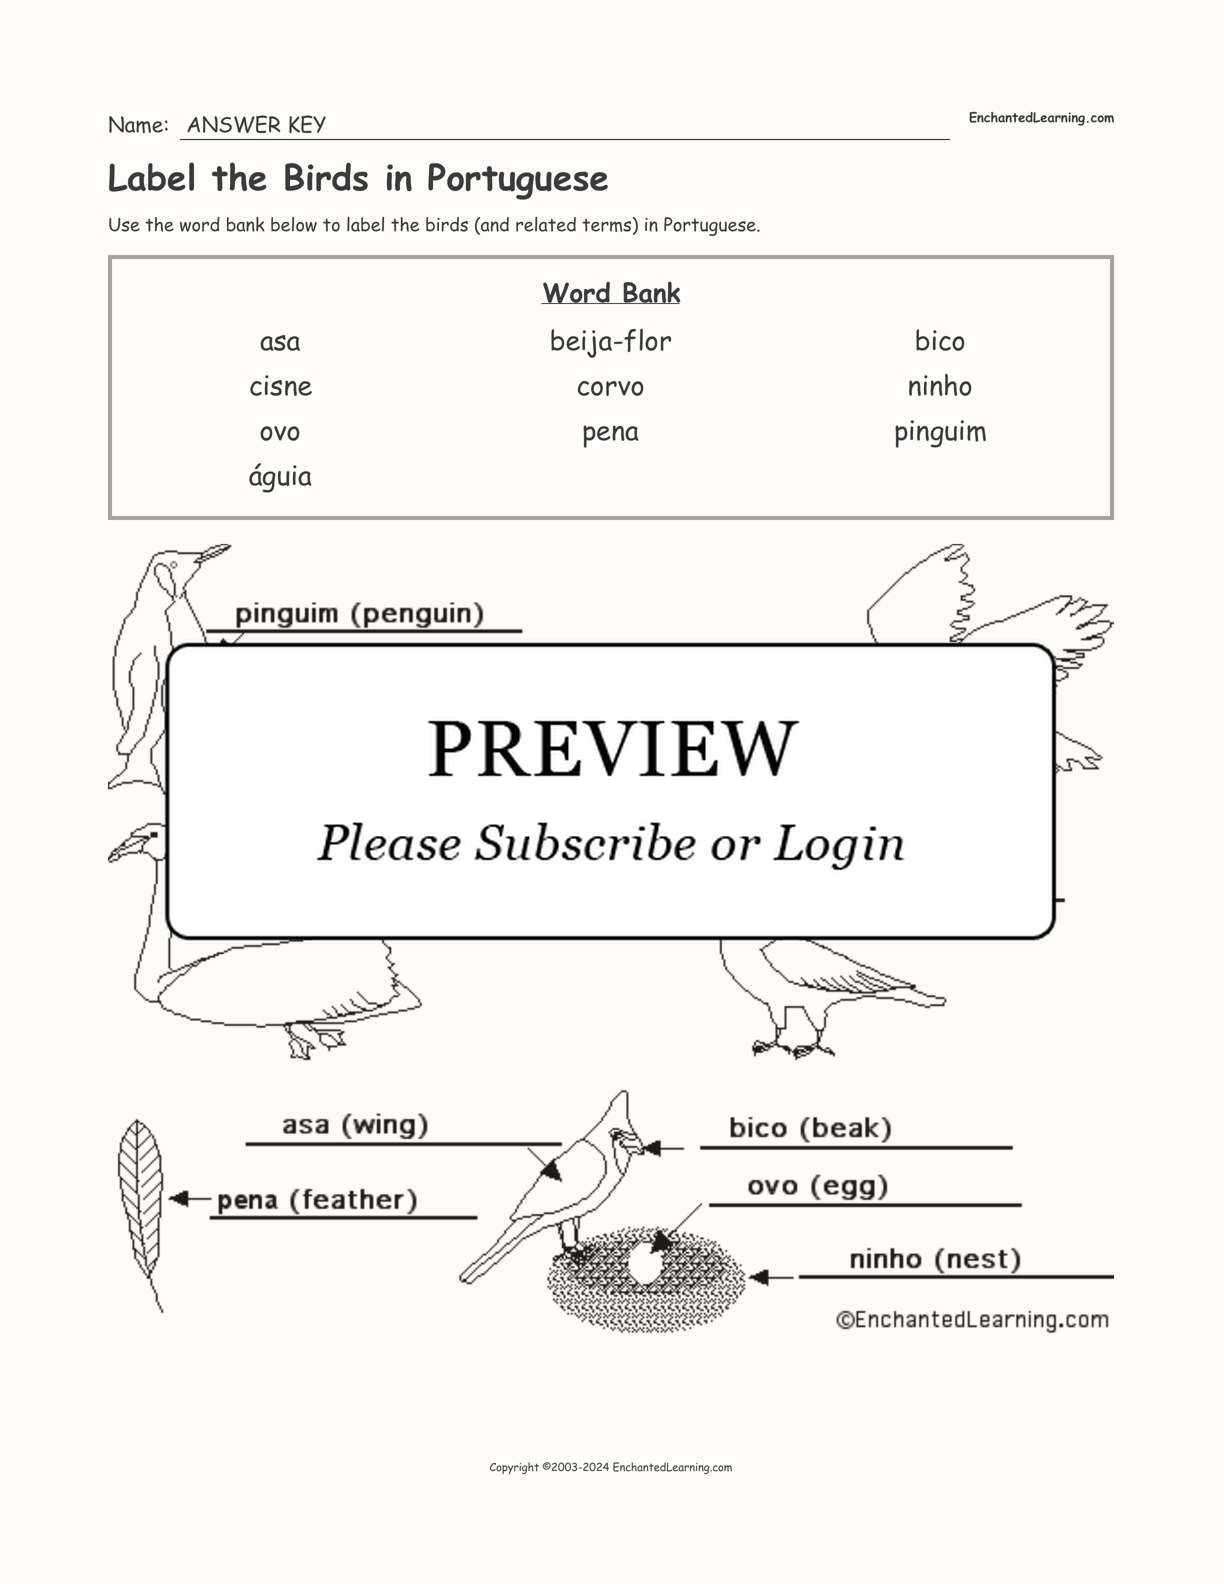 Label the Birds in Portuguese interactive worksheet page 2